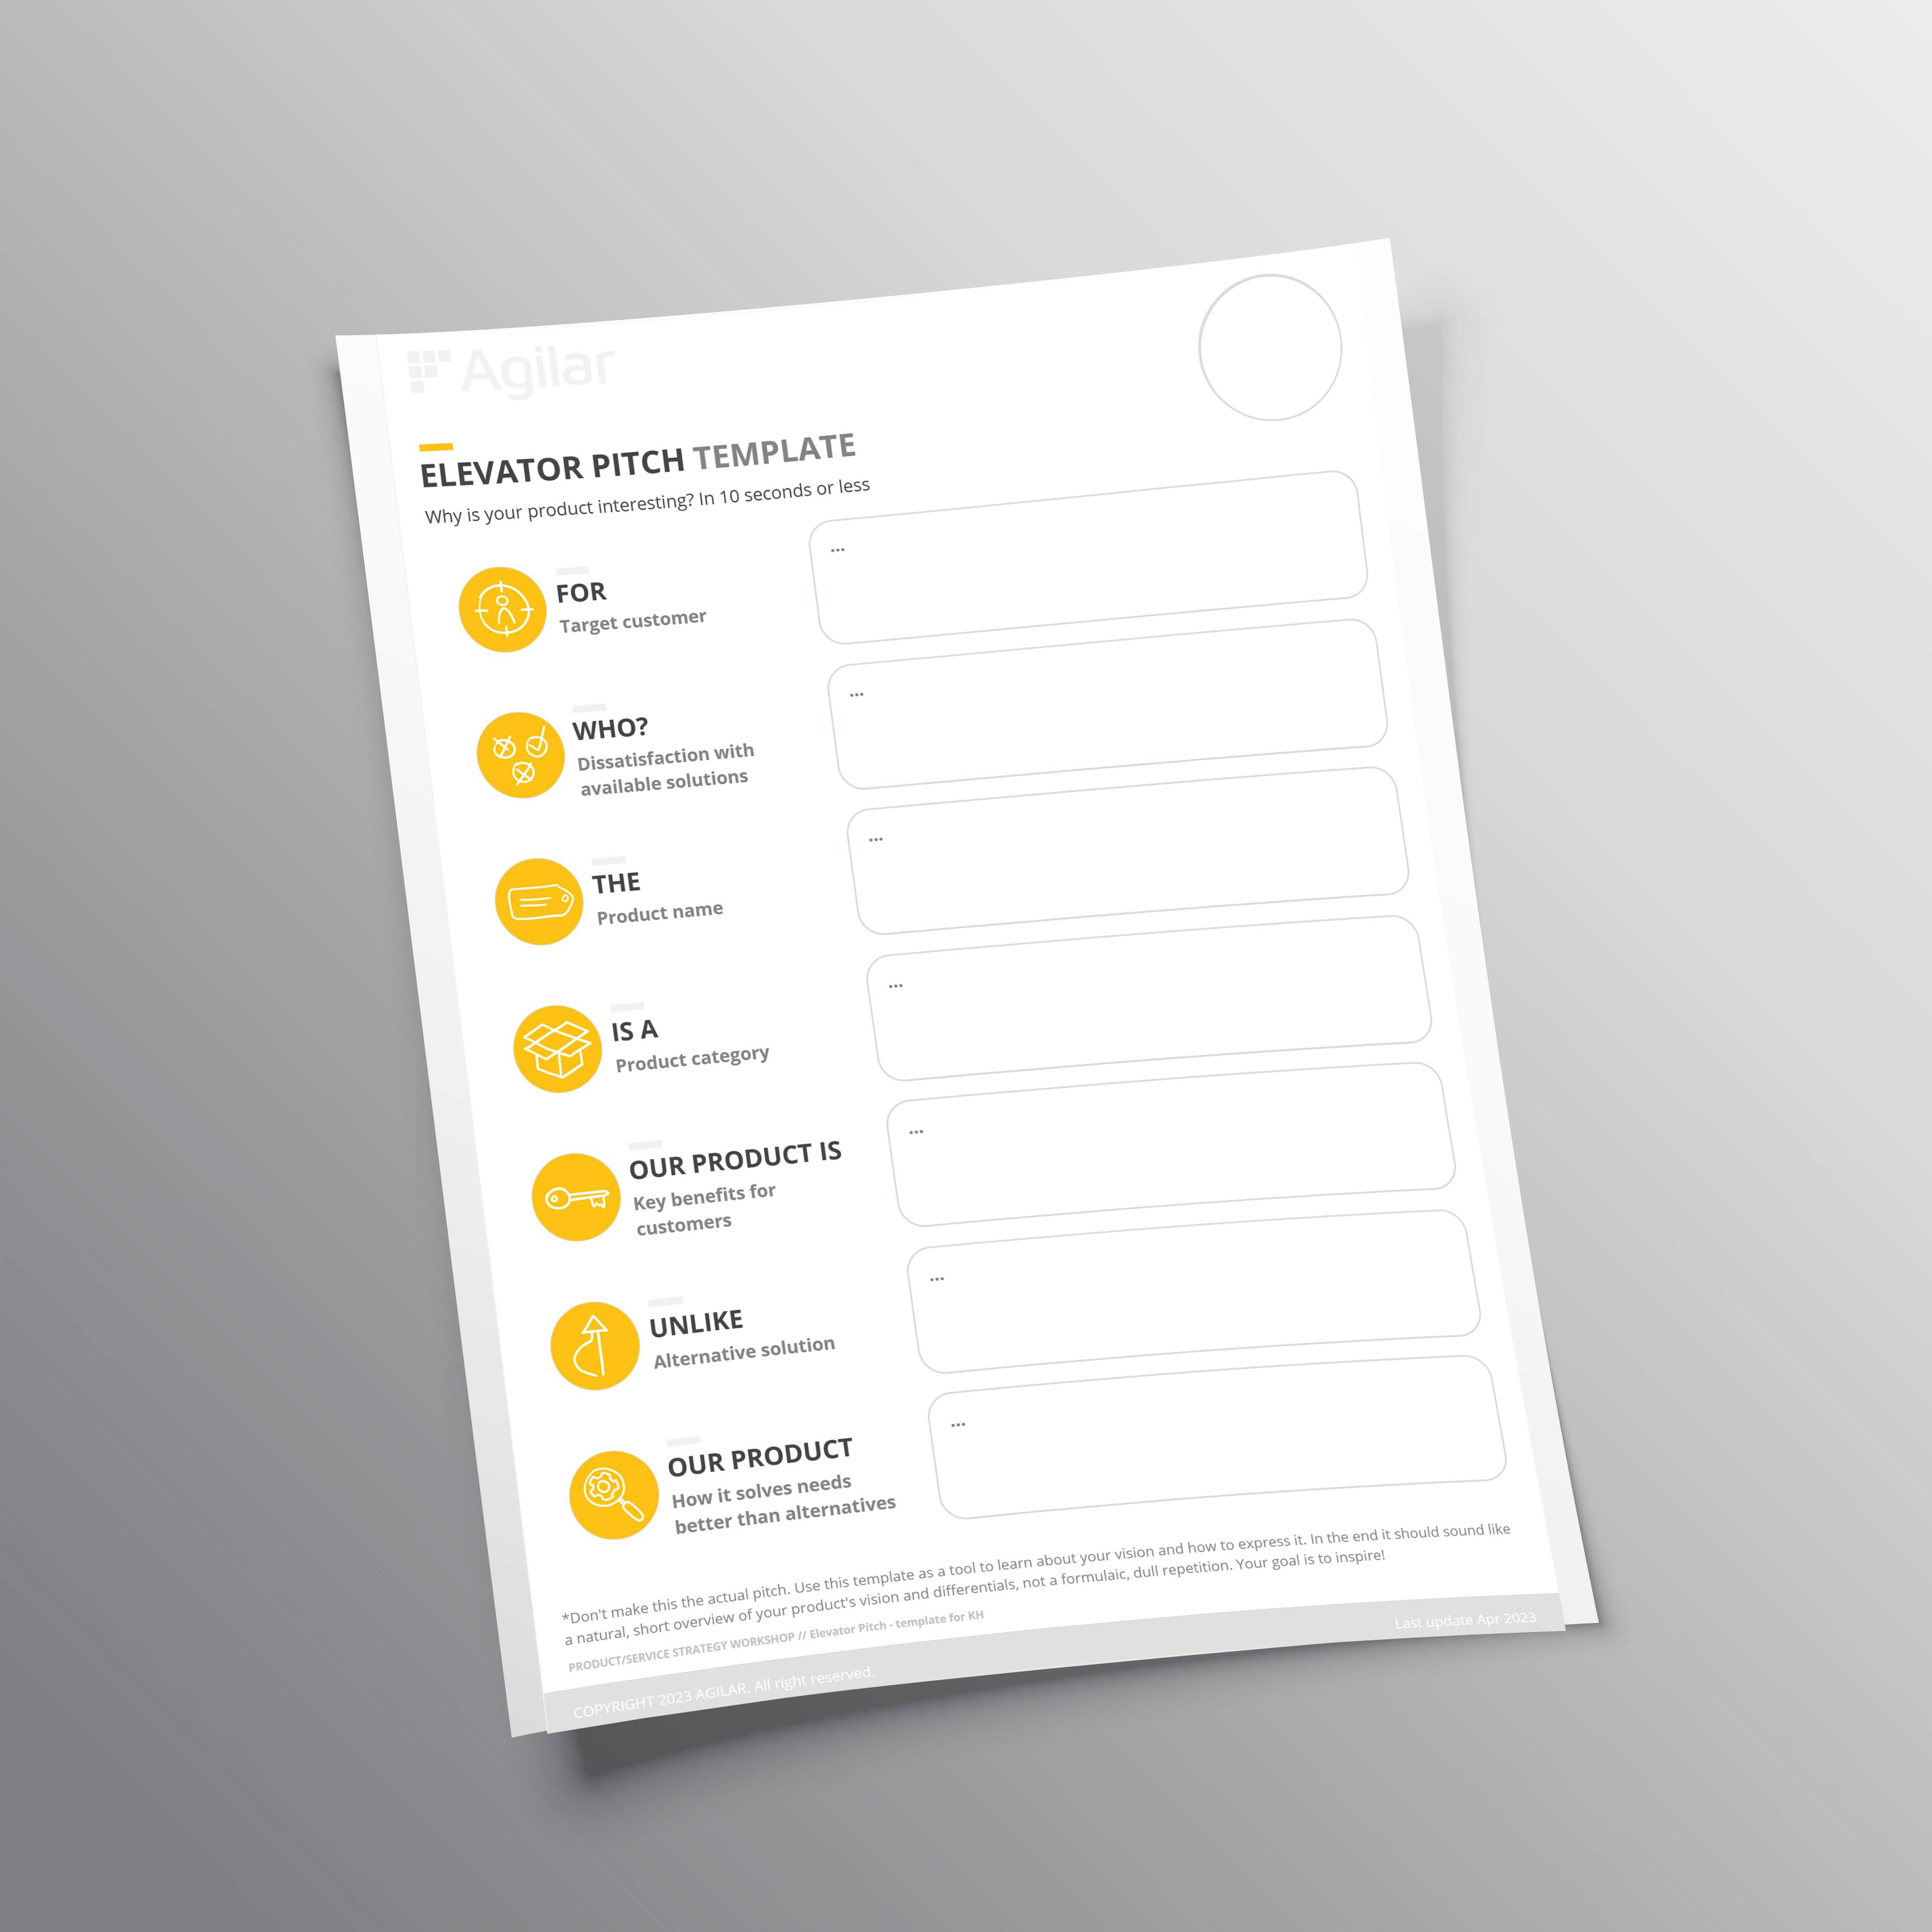 A preview of the Elevator Pitch template